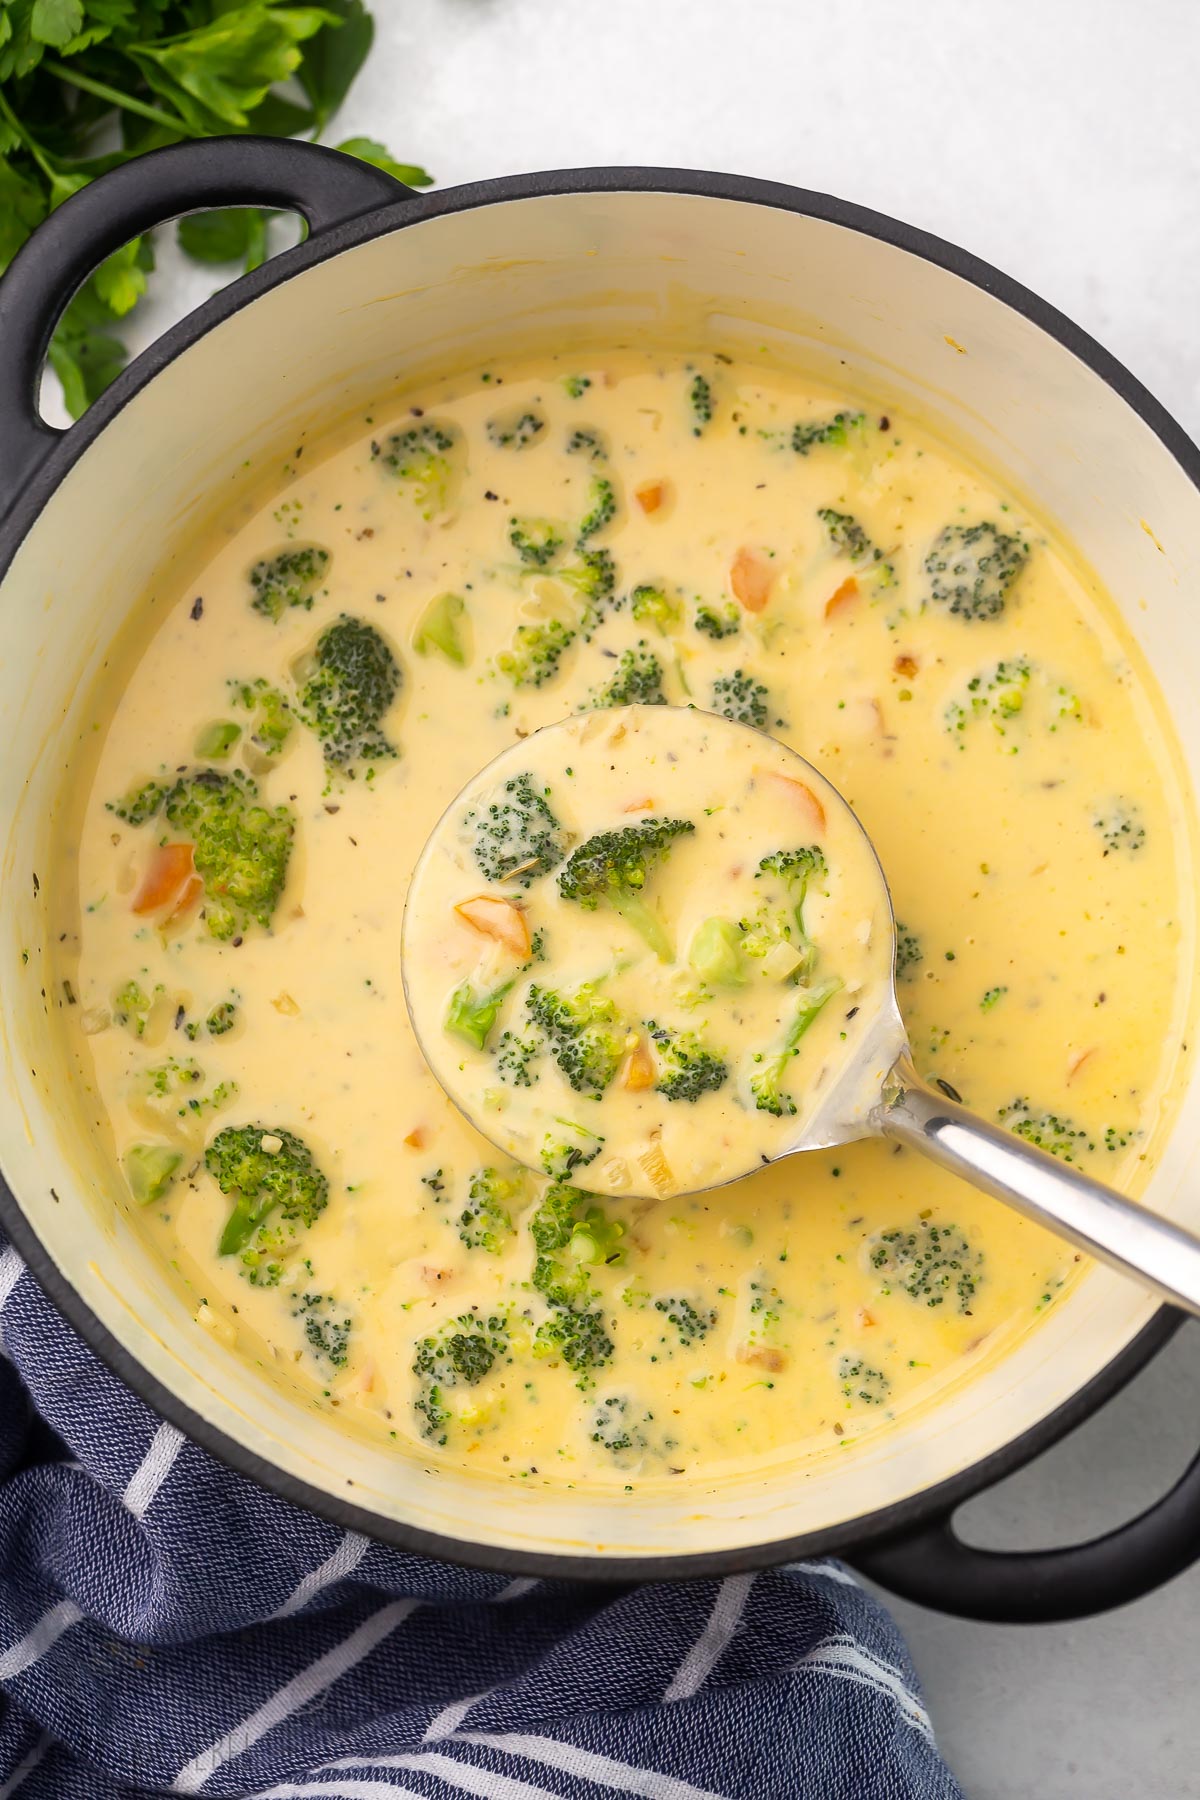 Top view of a full pot of broccoli cheddar soup with steel ladle scooping soup.